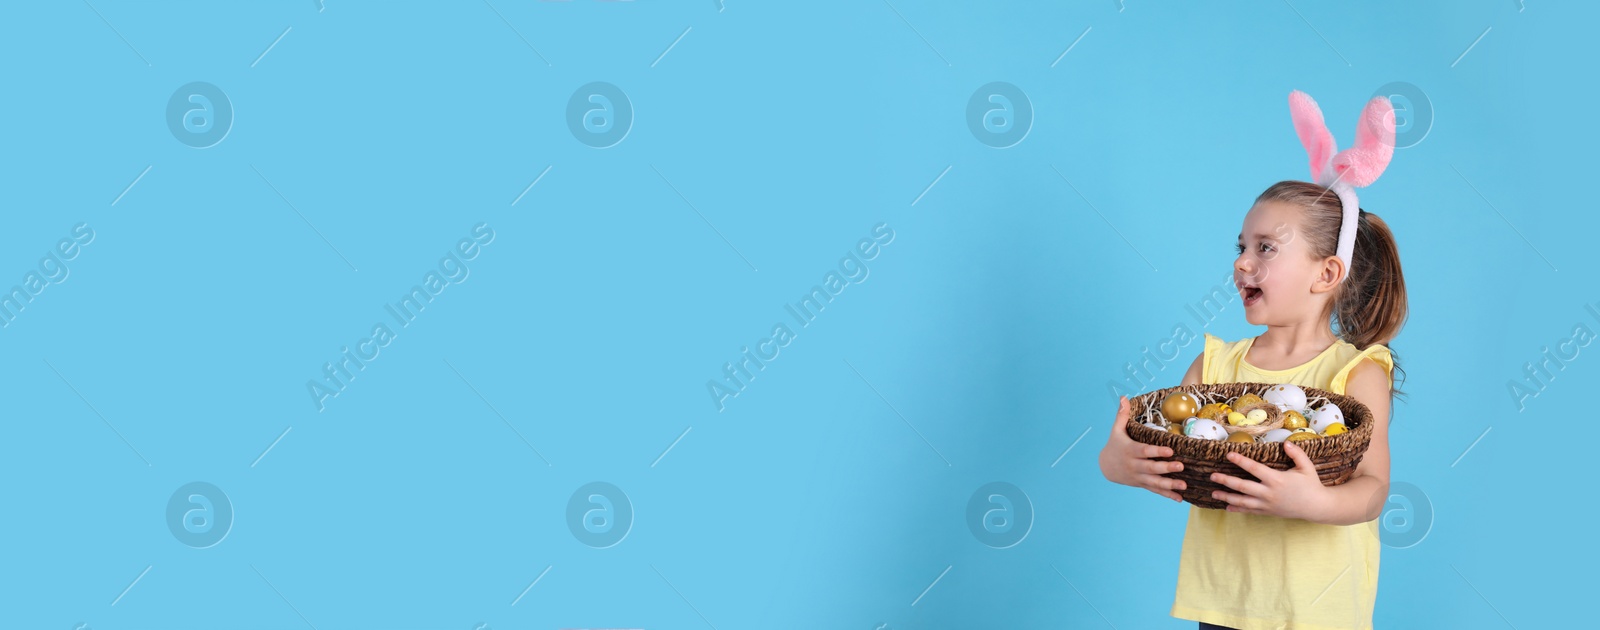 Photo of Excited little girl with bunny ears holding wicker basket full of Easter eggs on light blue background. Space for text